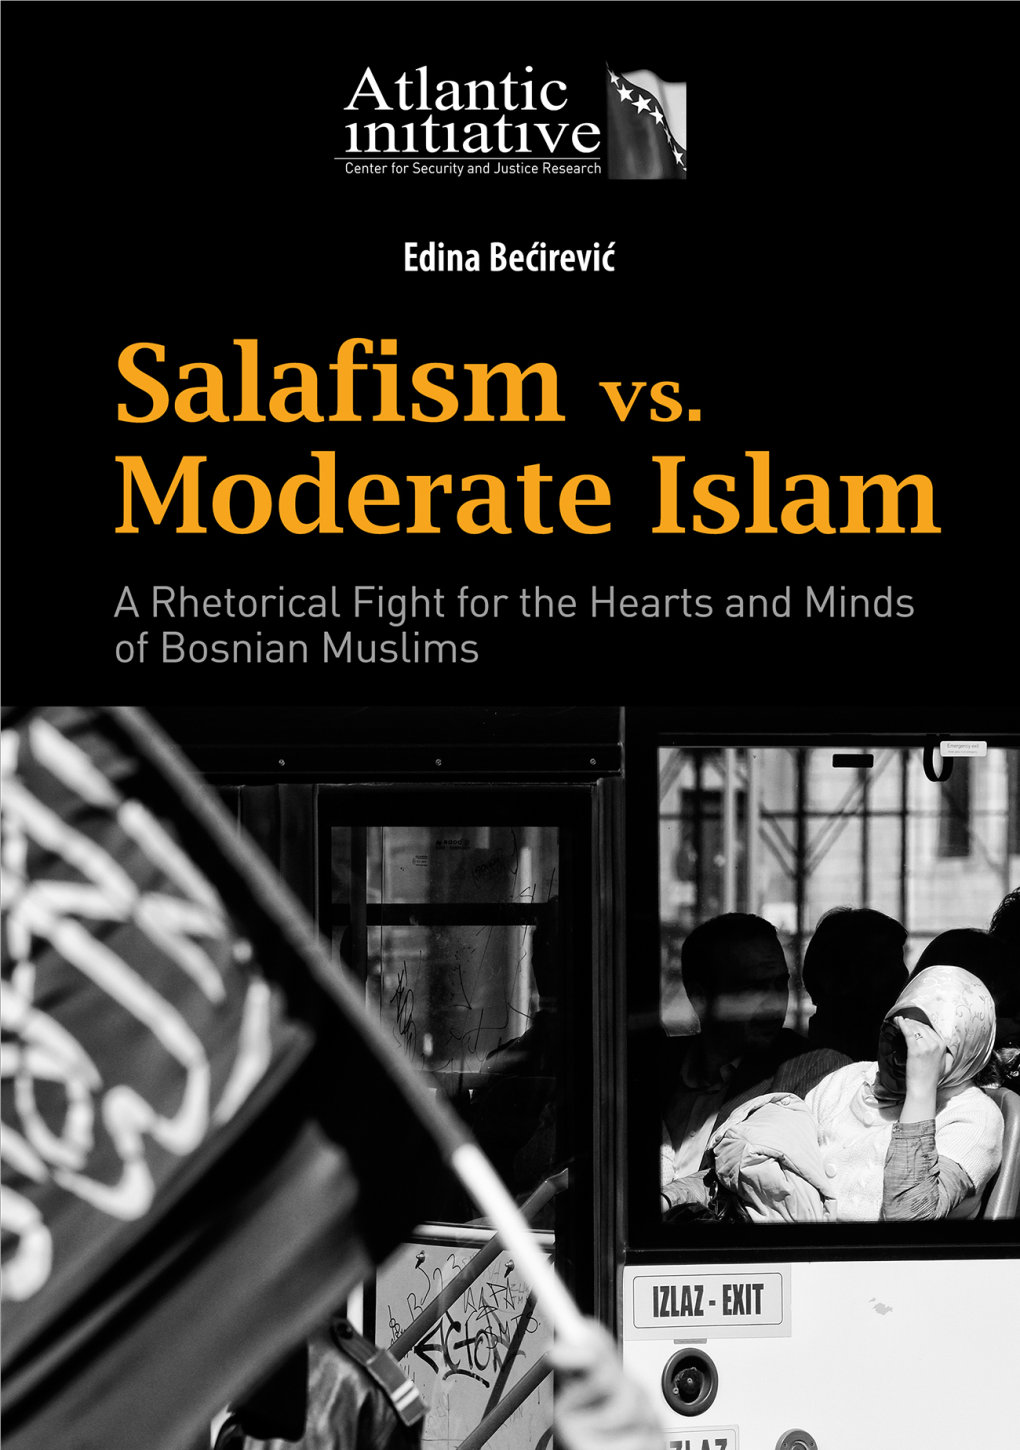 SALAFISM VS. MODERATE ISLAM a Rhetorical Fight for the Hearts and Minds of Bosnian Muslims